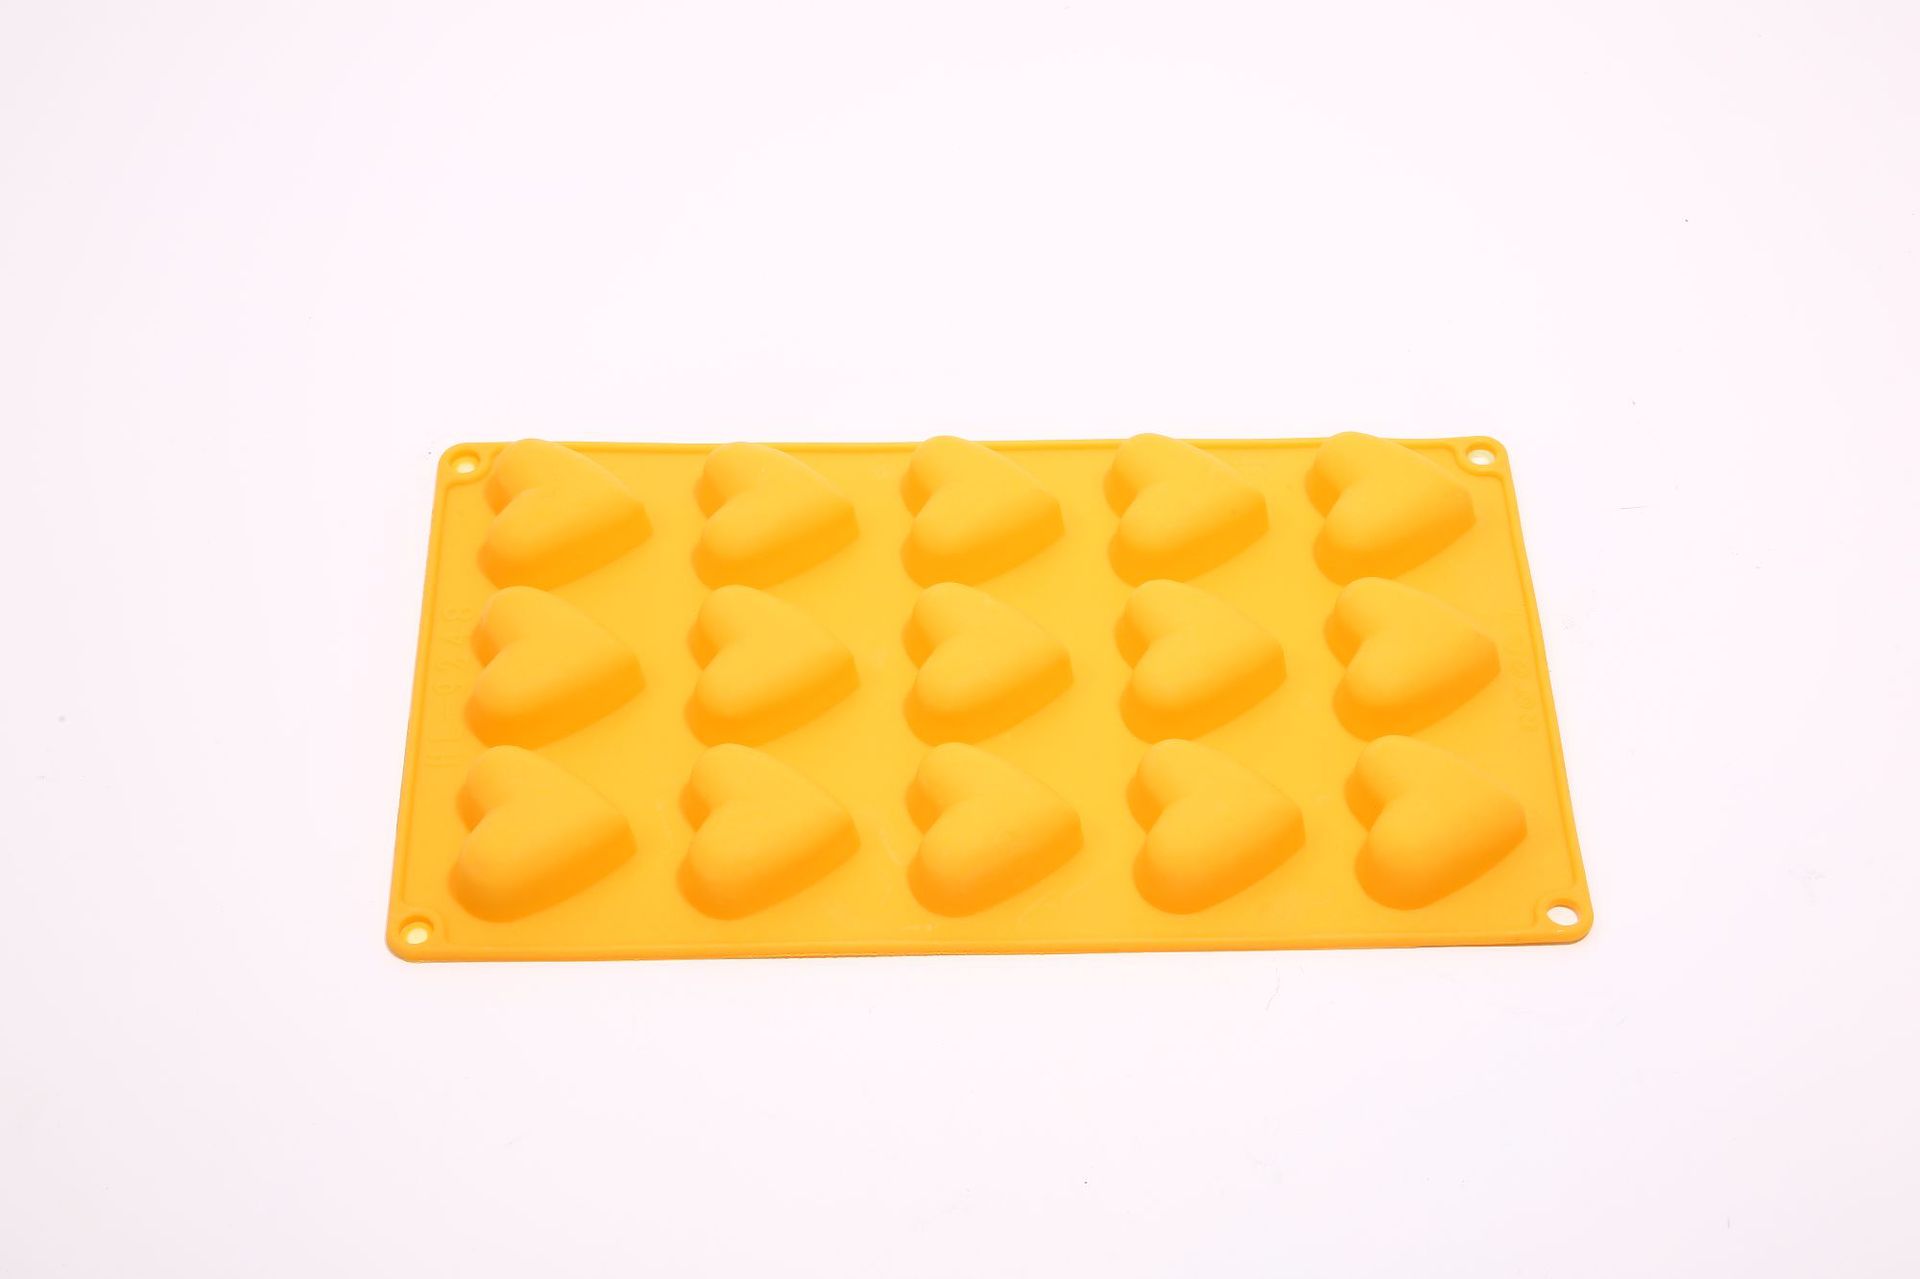 valentine‘s day diy heart-shaped silicone mold baking mold cake chocolate cookie handmade soap mold ice grid mold